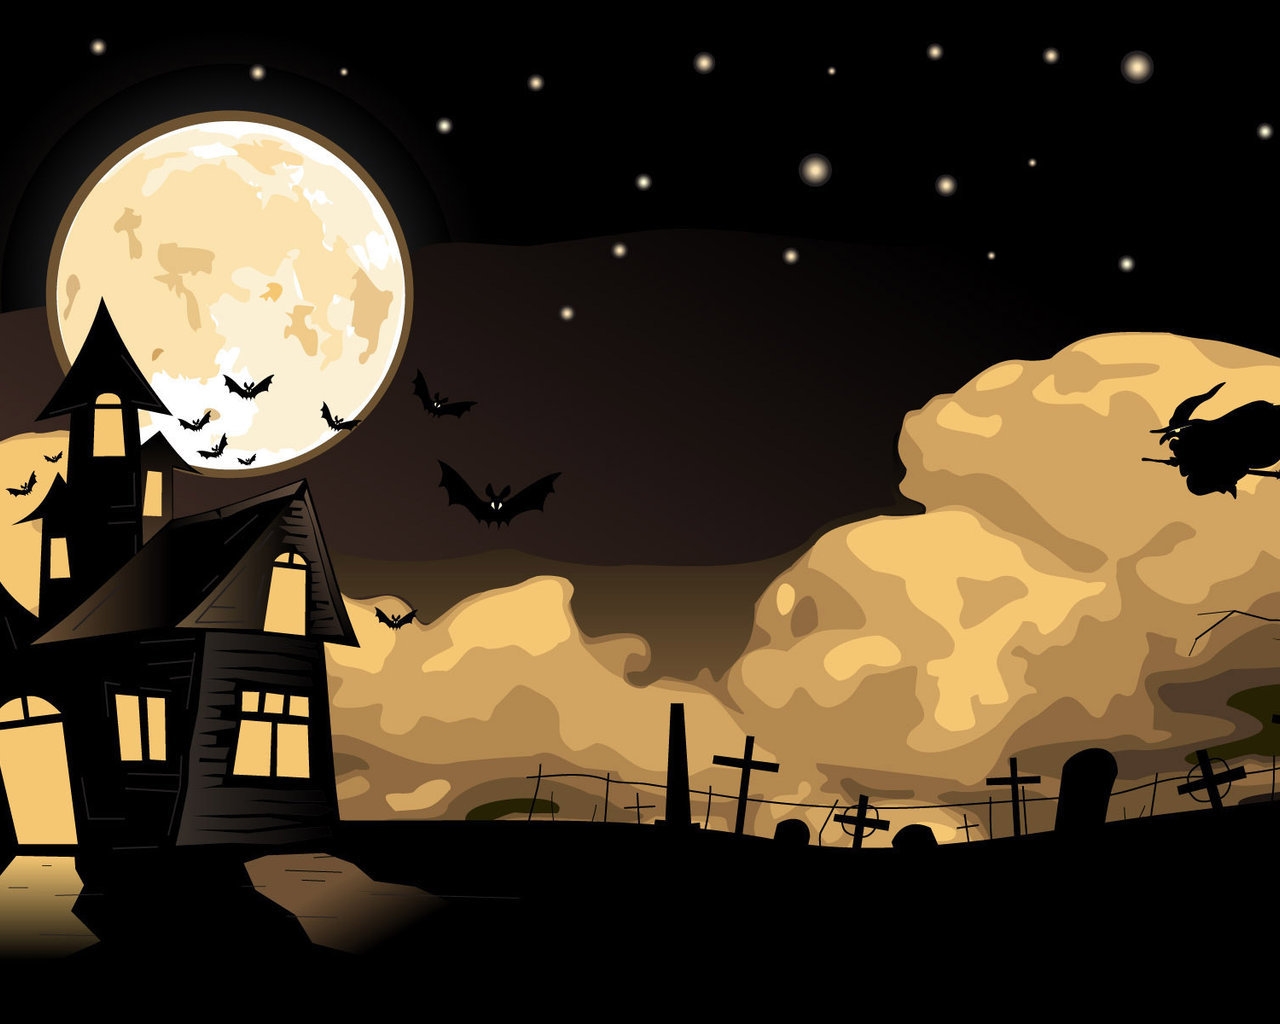 The Halloween Night for 1280 x 1024 resolution